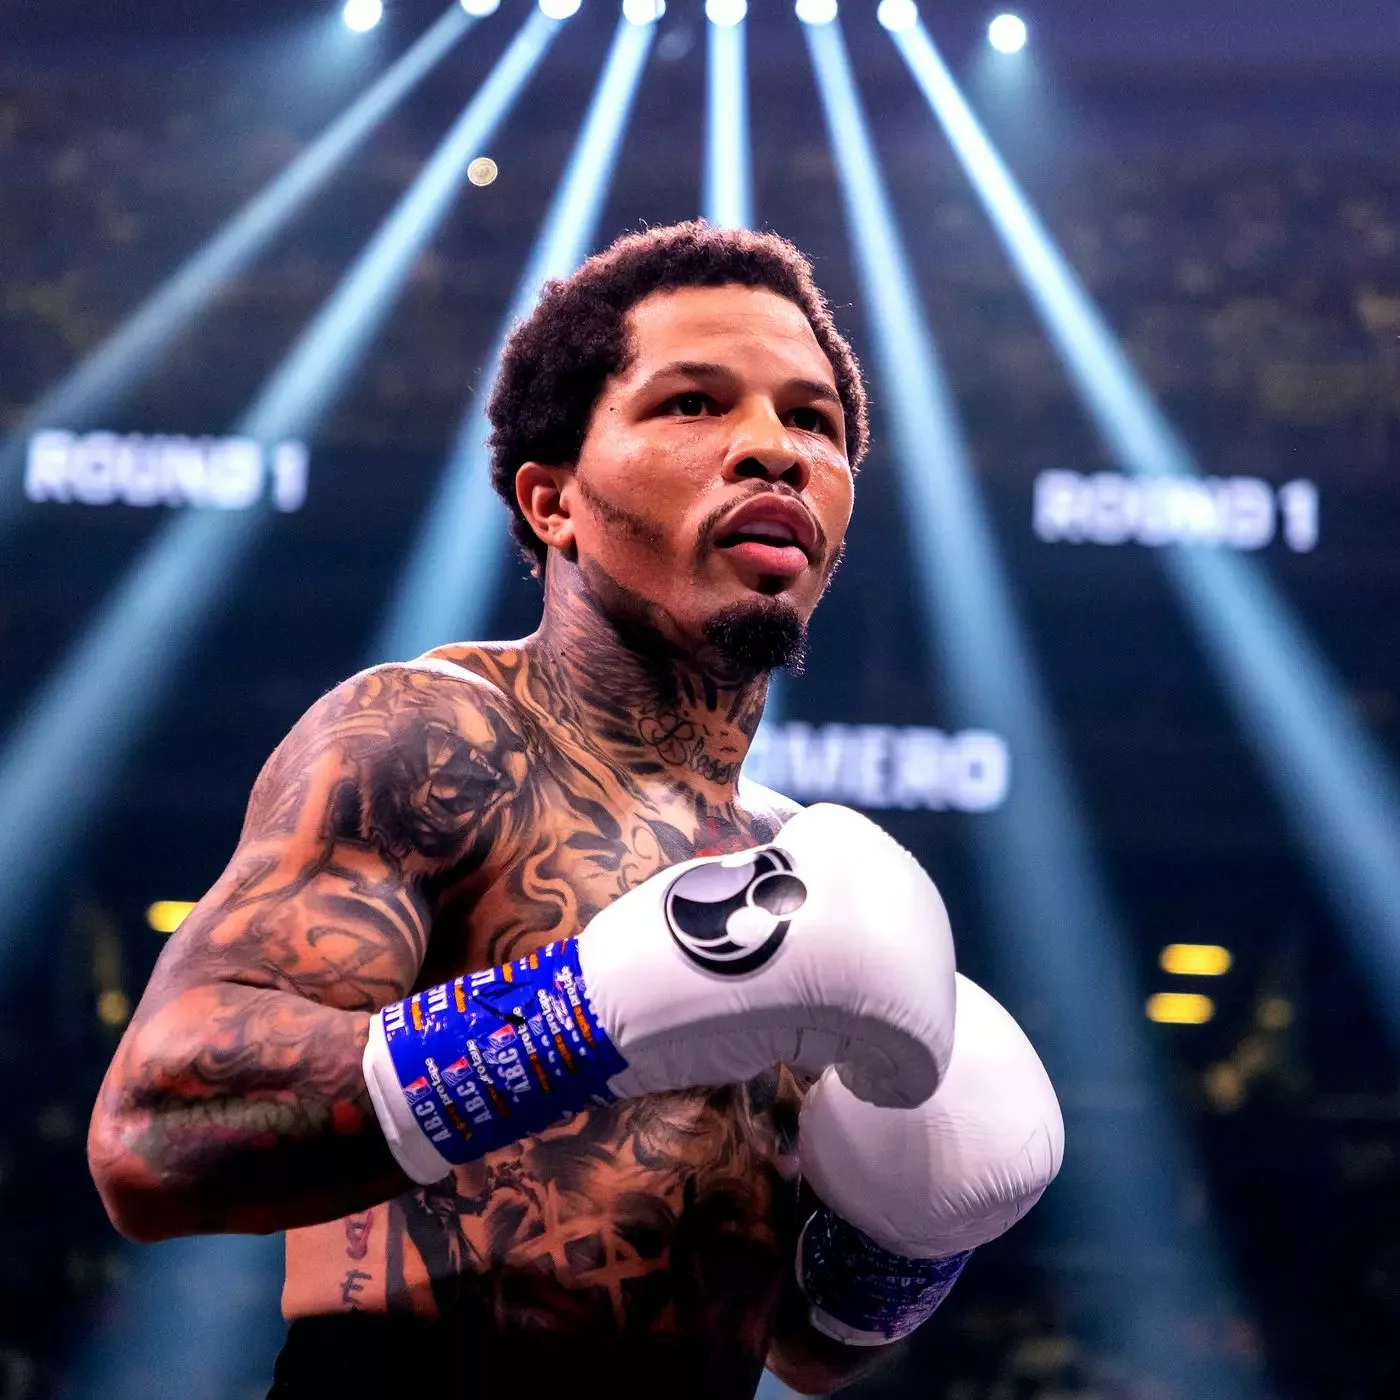 GERVONTA DAVIS SAYS HE’S INNOCENT, CLAIMS THE ALLEGED VICTIM WAS OFFERED K TO PRESS CHARGES